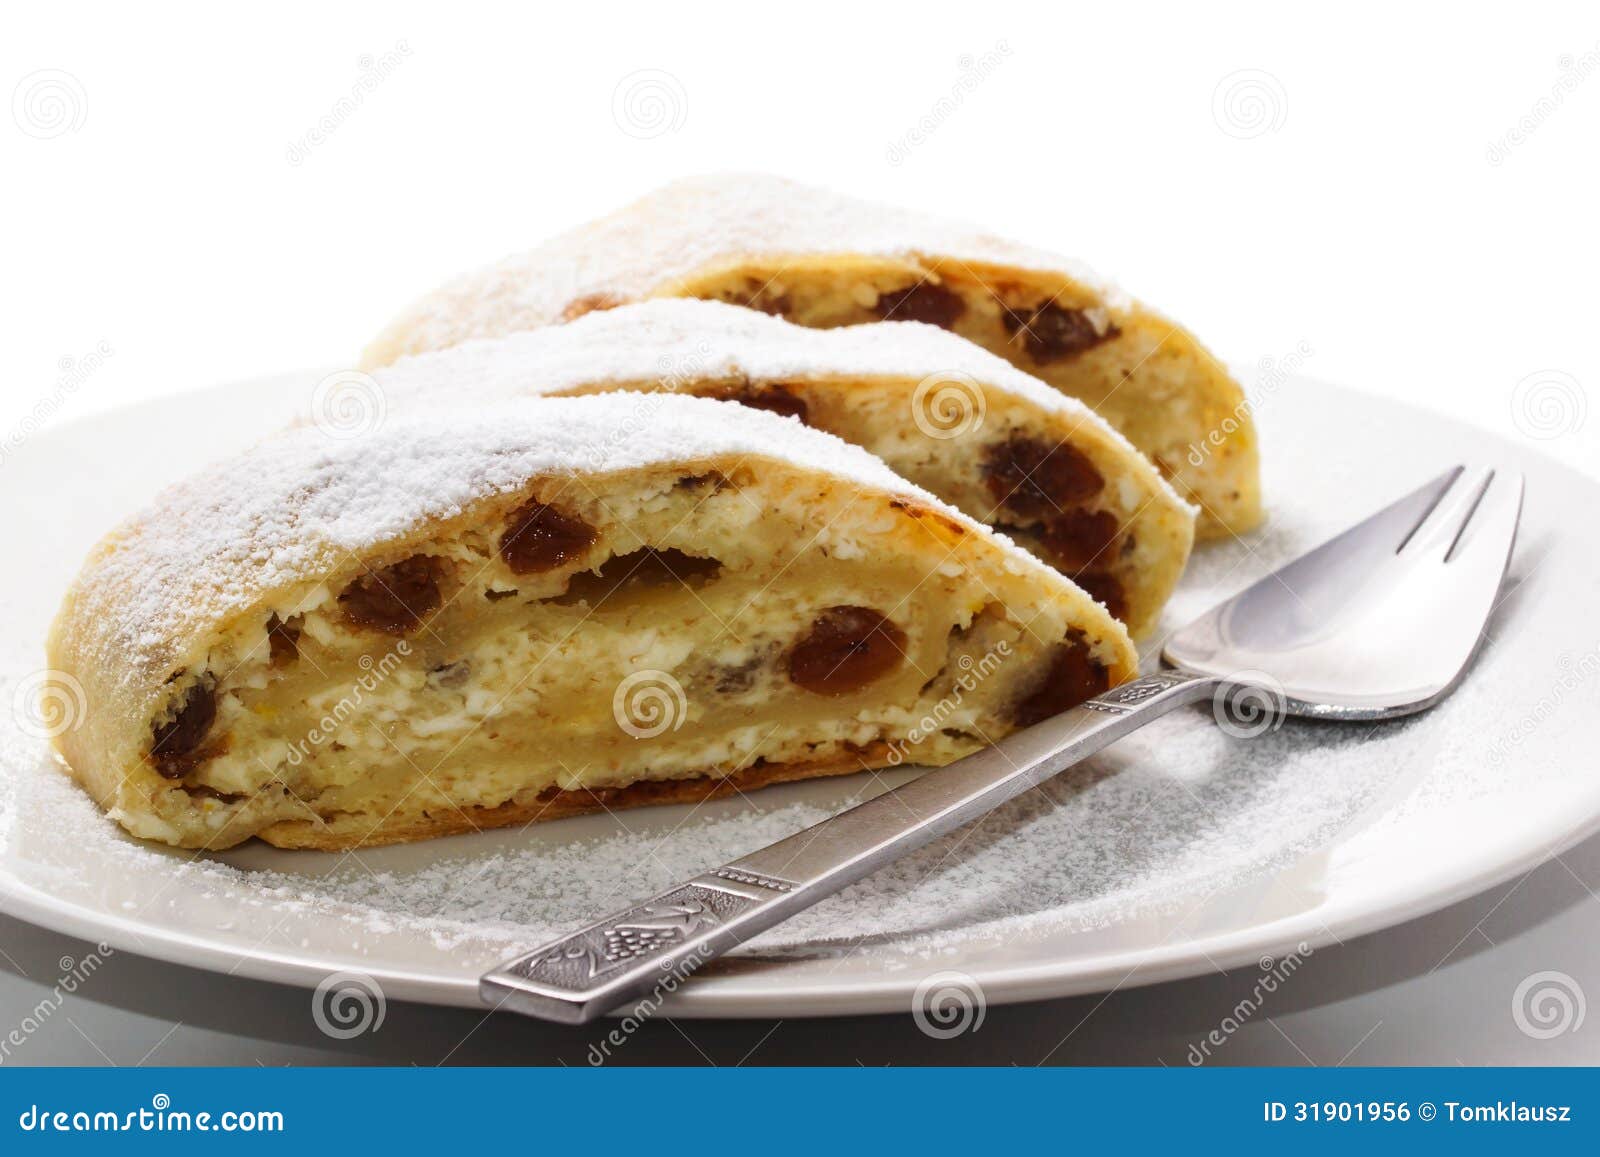 Homemade Curd Cheese Strudel Stock Photo Image Of Strudel